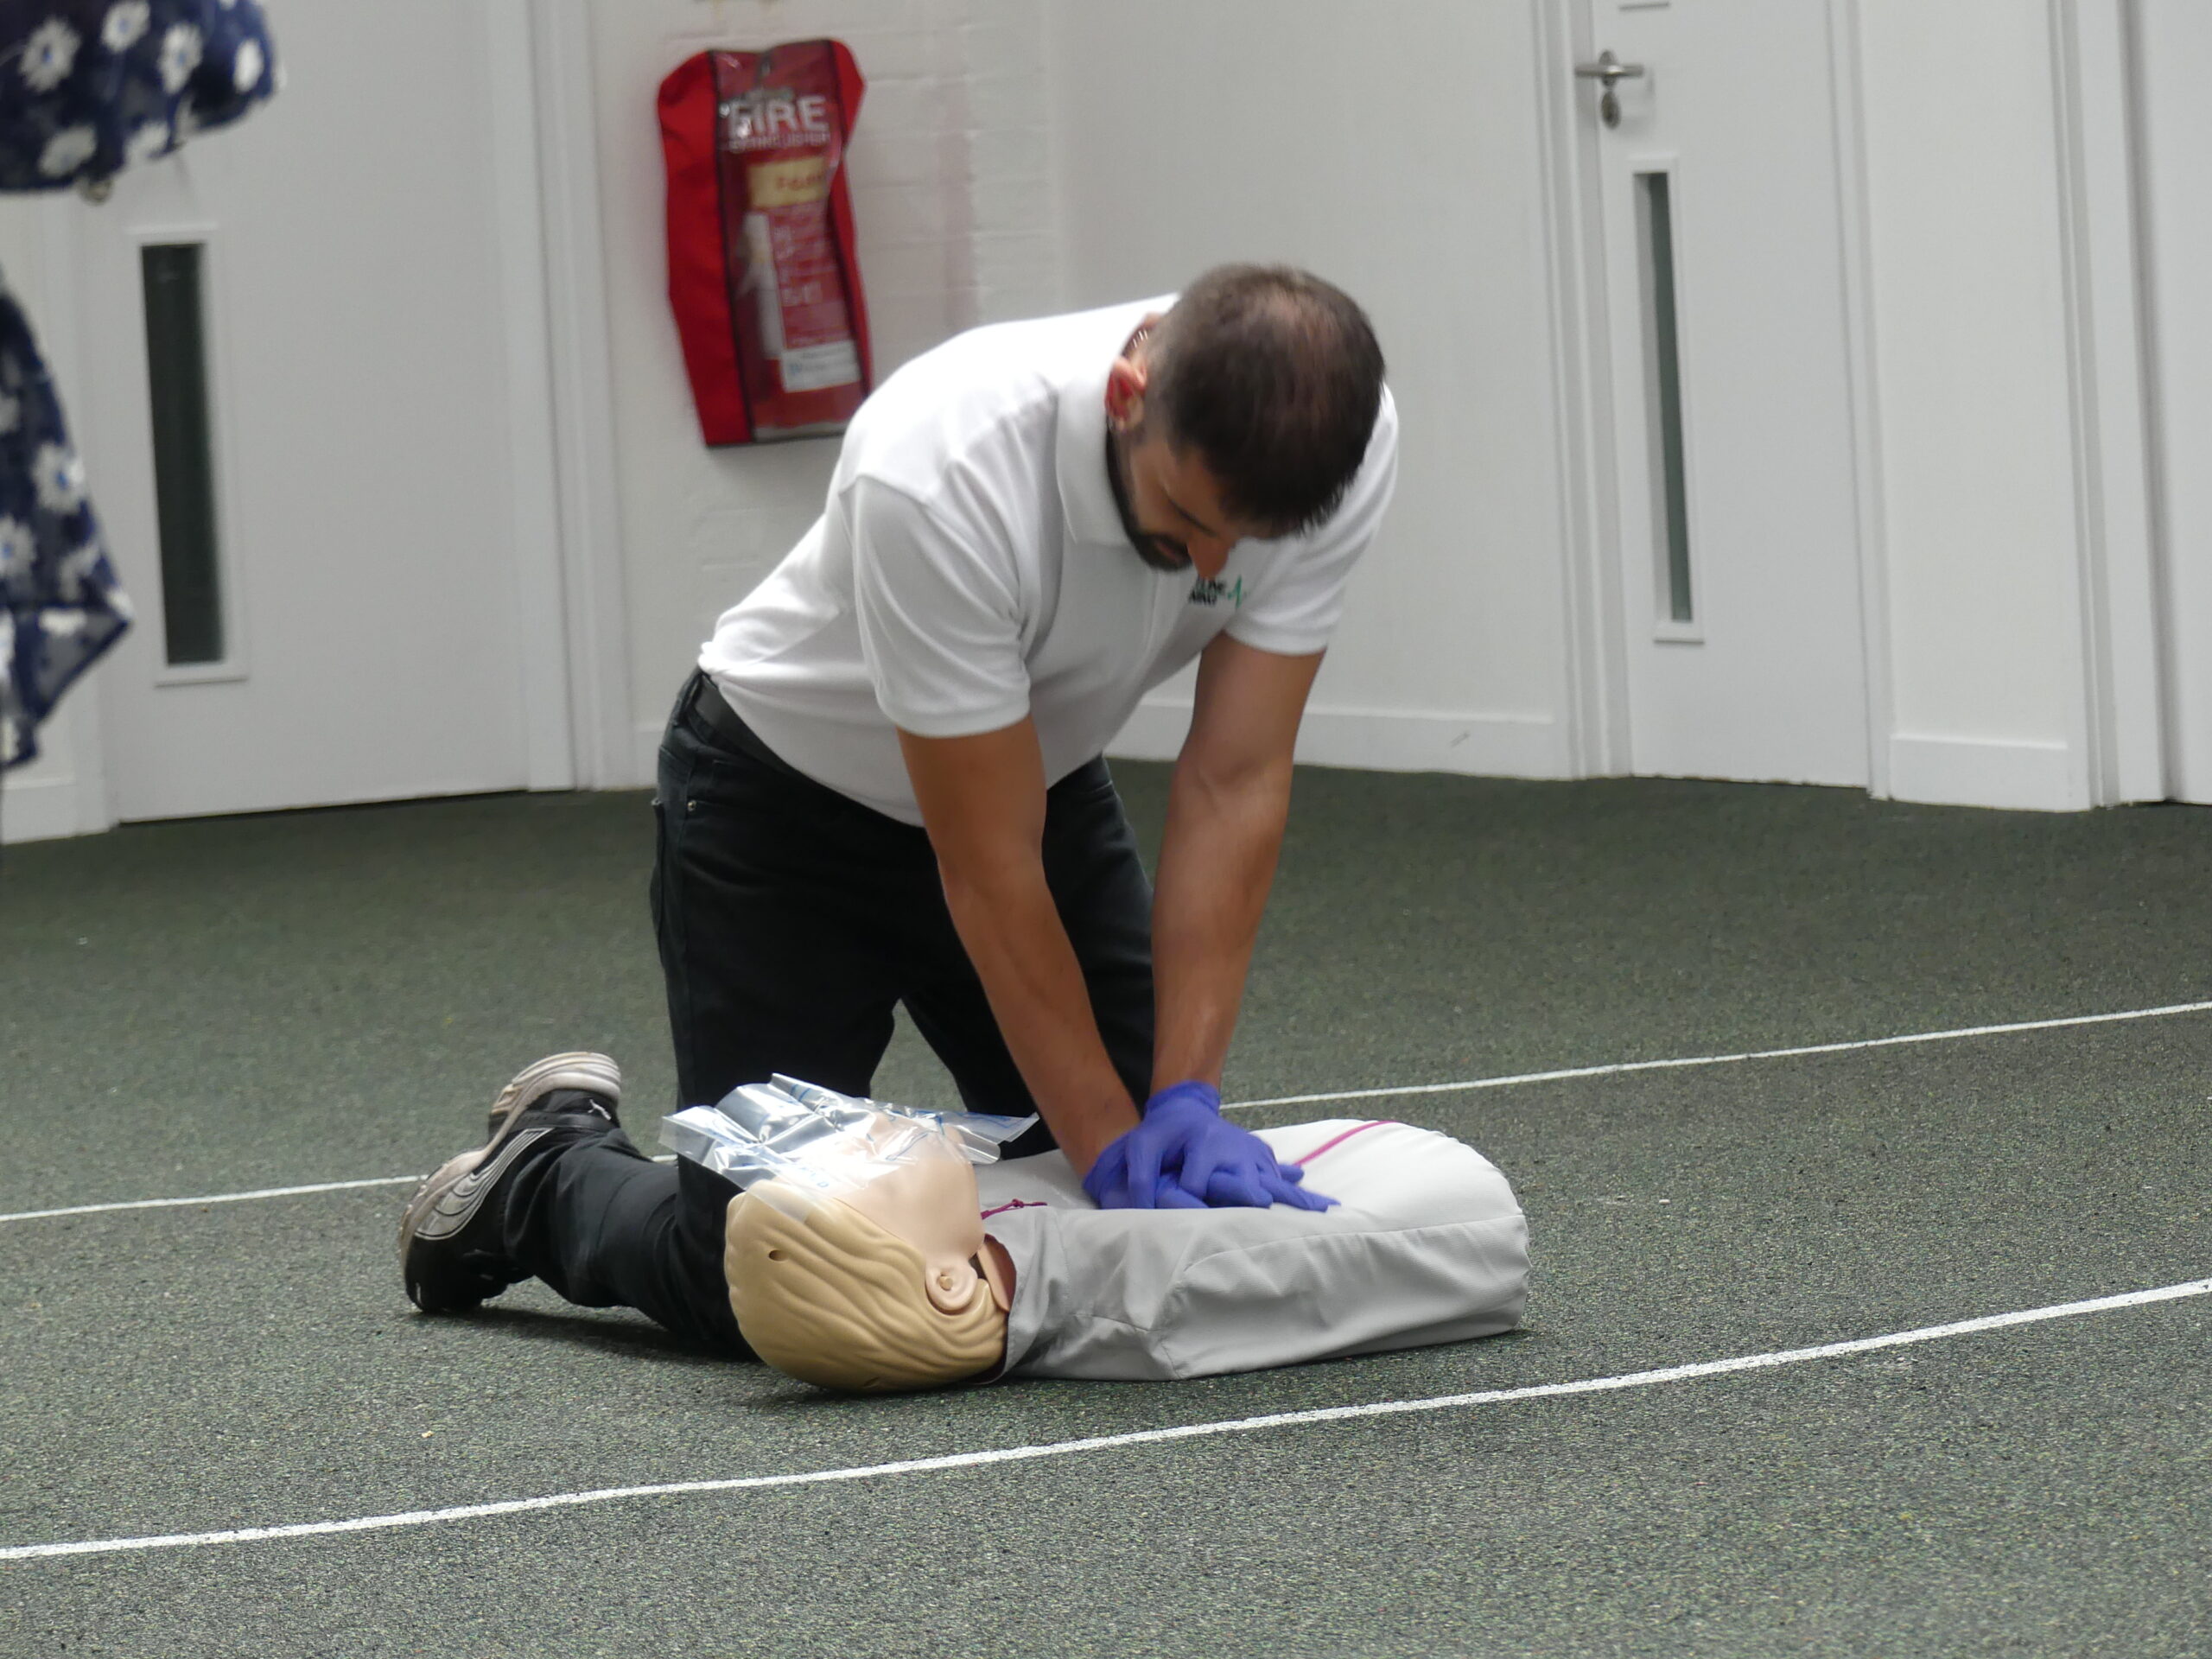 Frontline Training instructor demonstrating chest compressions on a first aid course